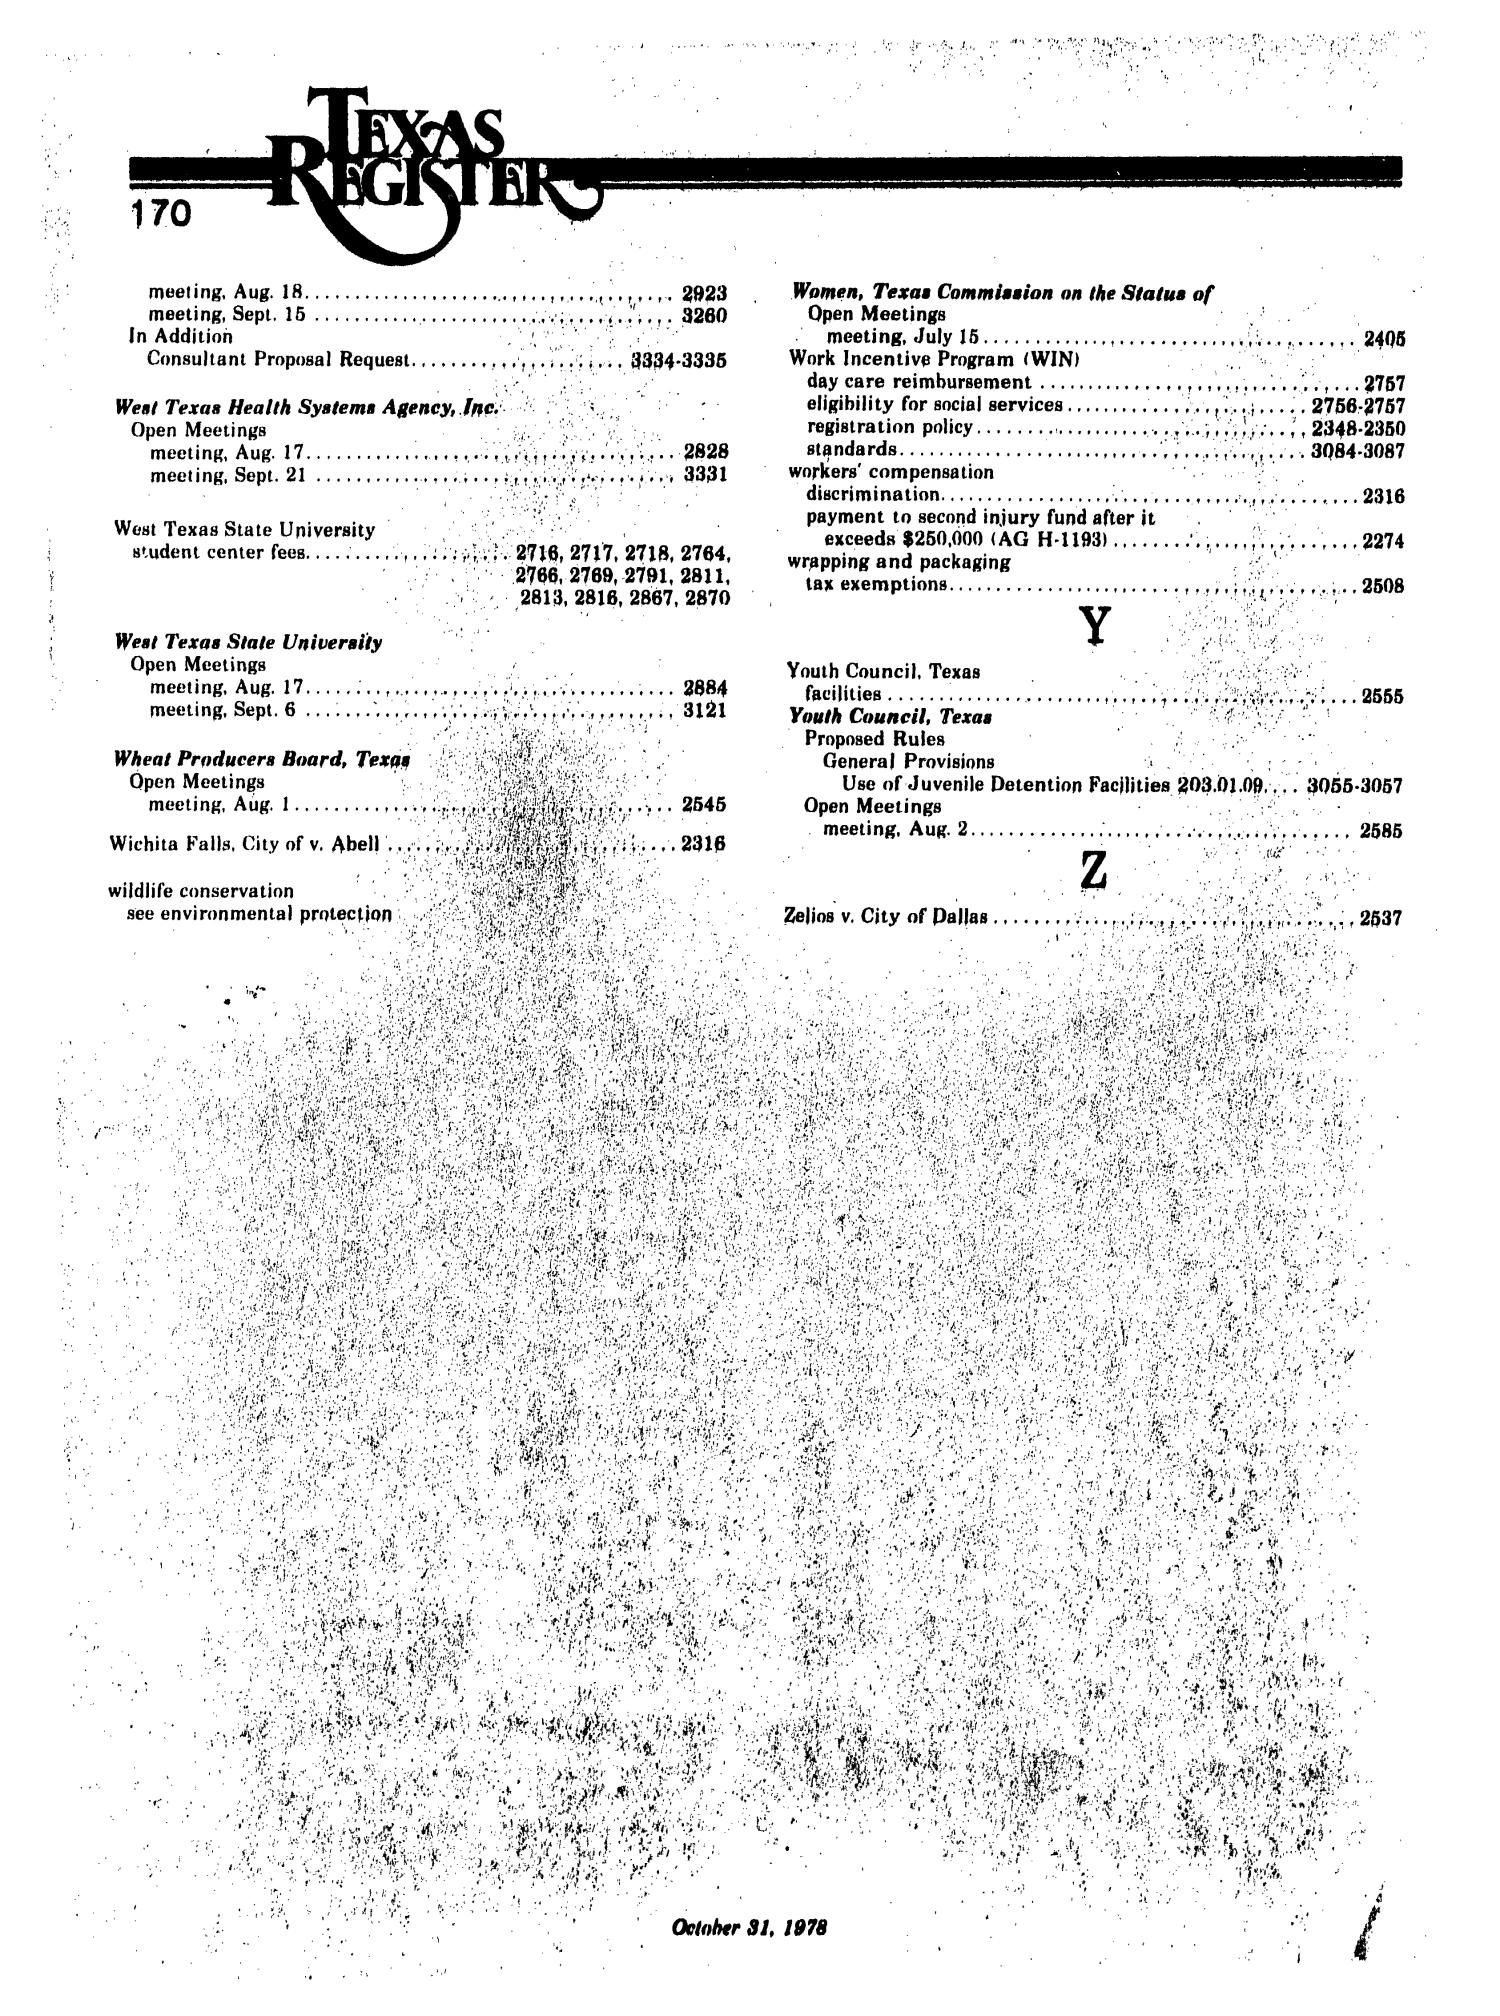 Texas Register, Volume 3, Quarterly Index III, Pages 137-170, October 31, 1978
                                                
                                                    170
                                                